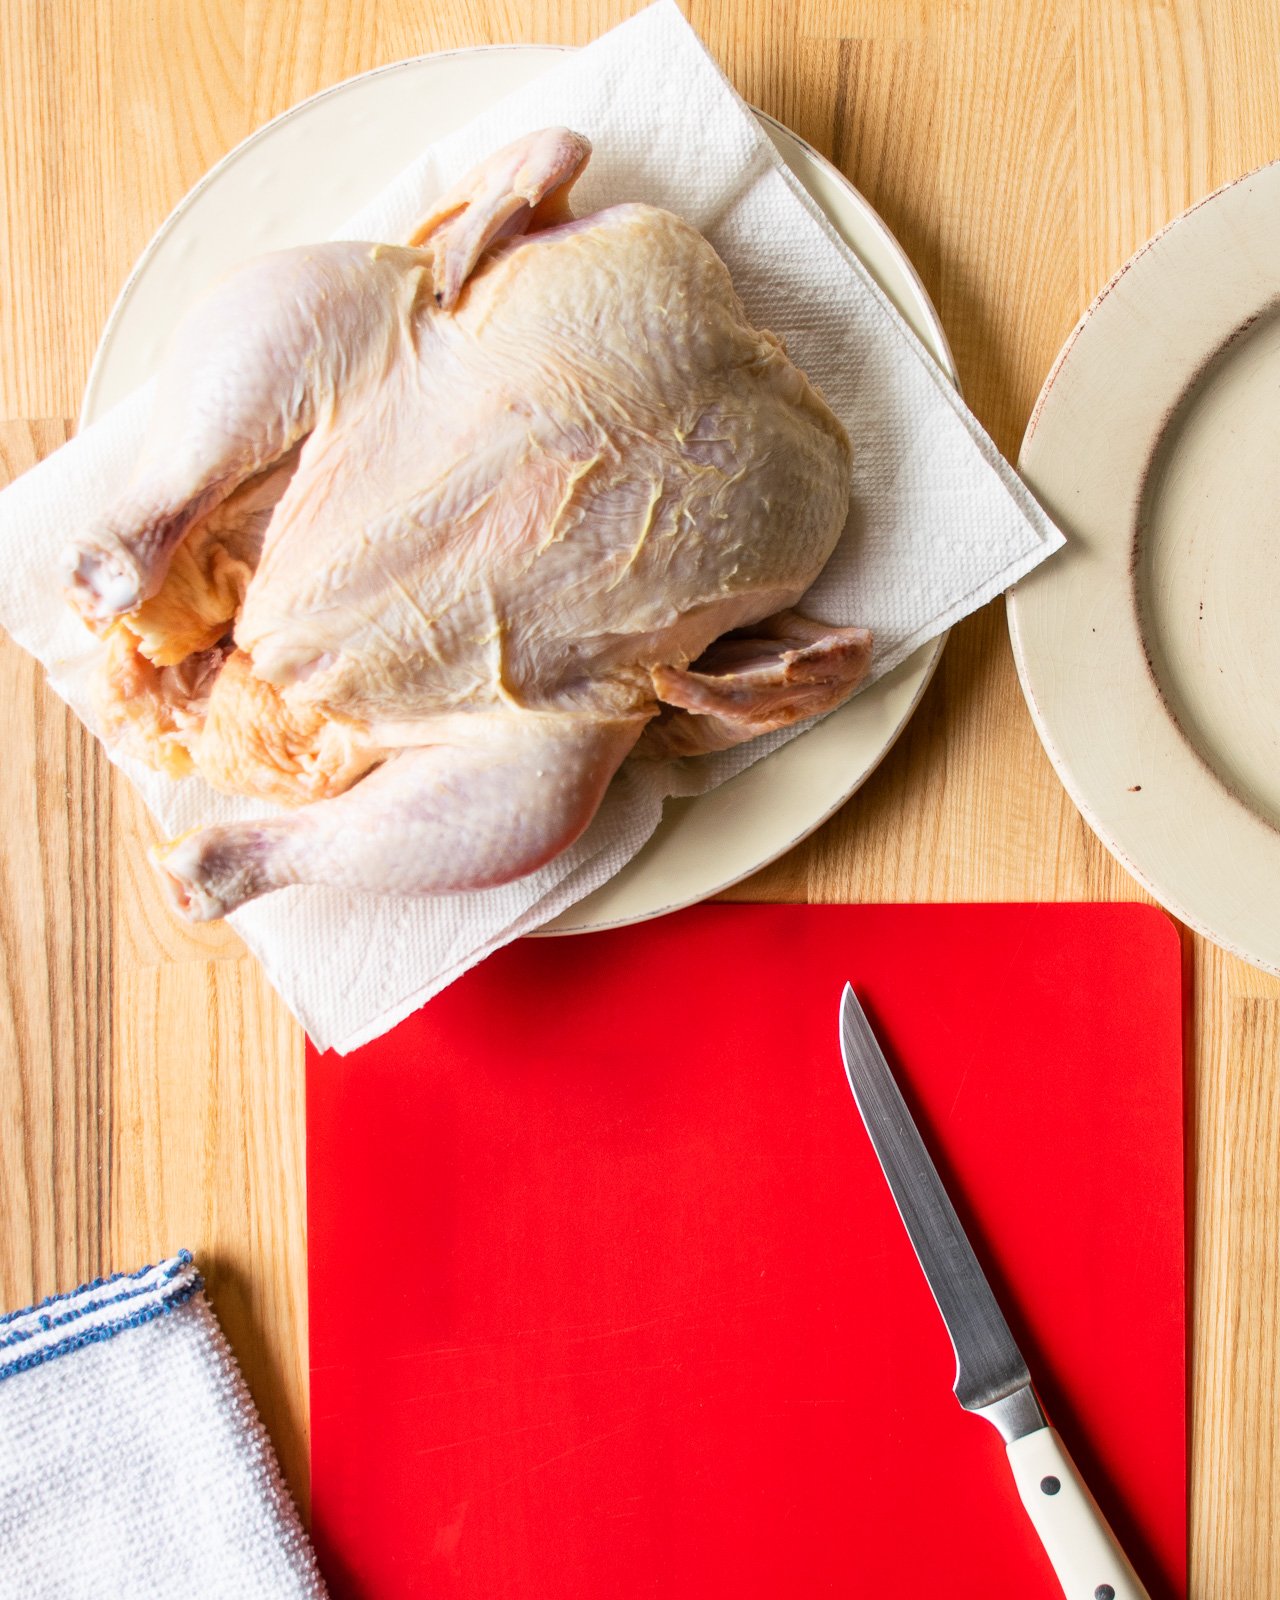 How to Use a Boning Knife to Cut Apart Chicken Carcass